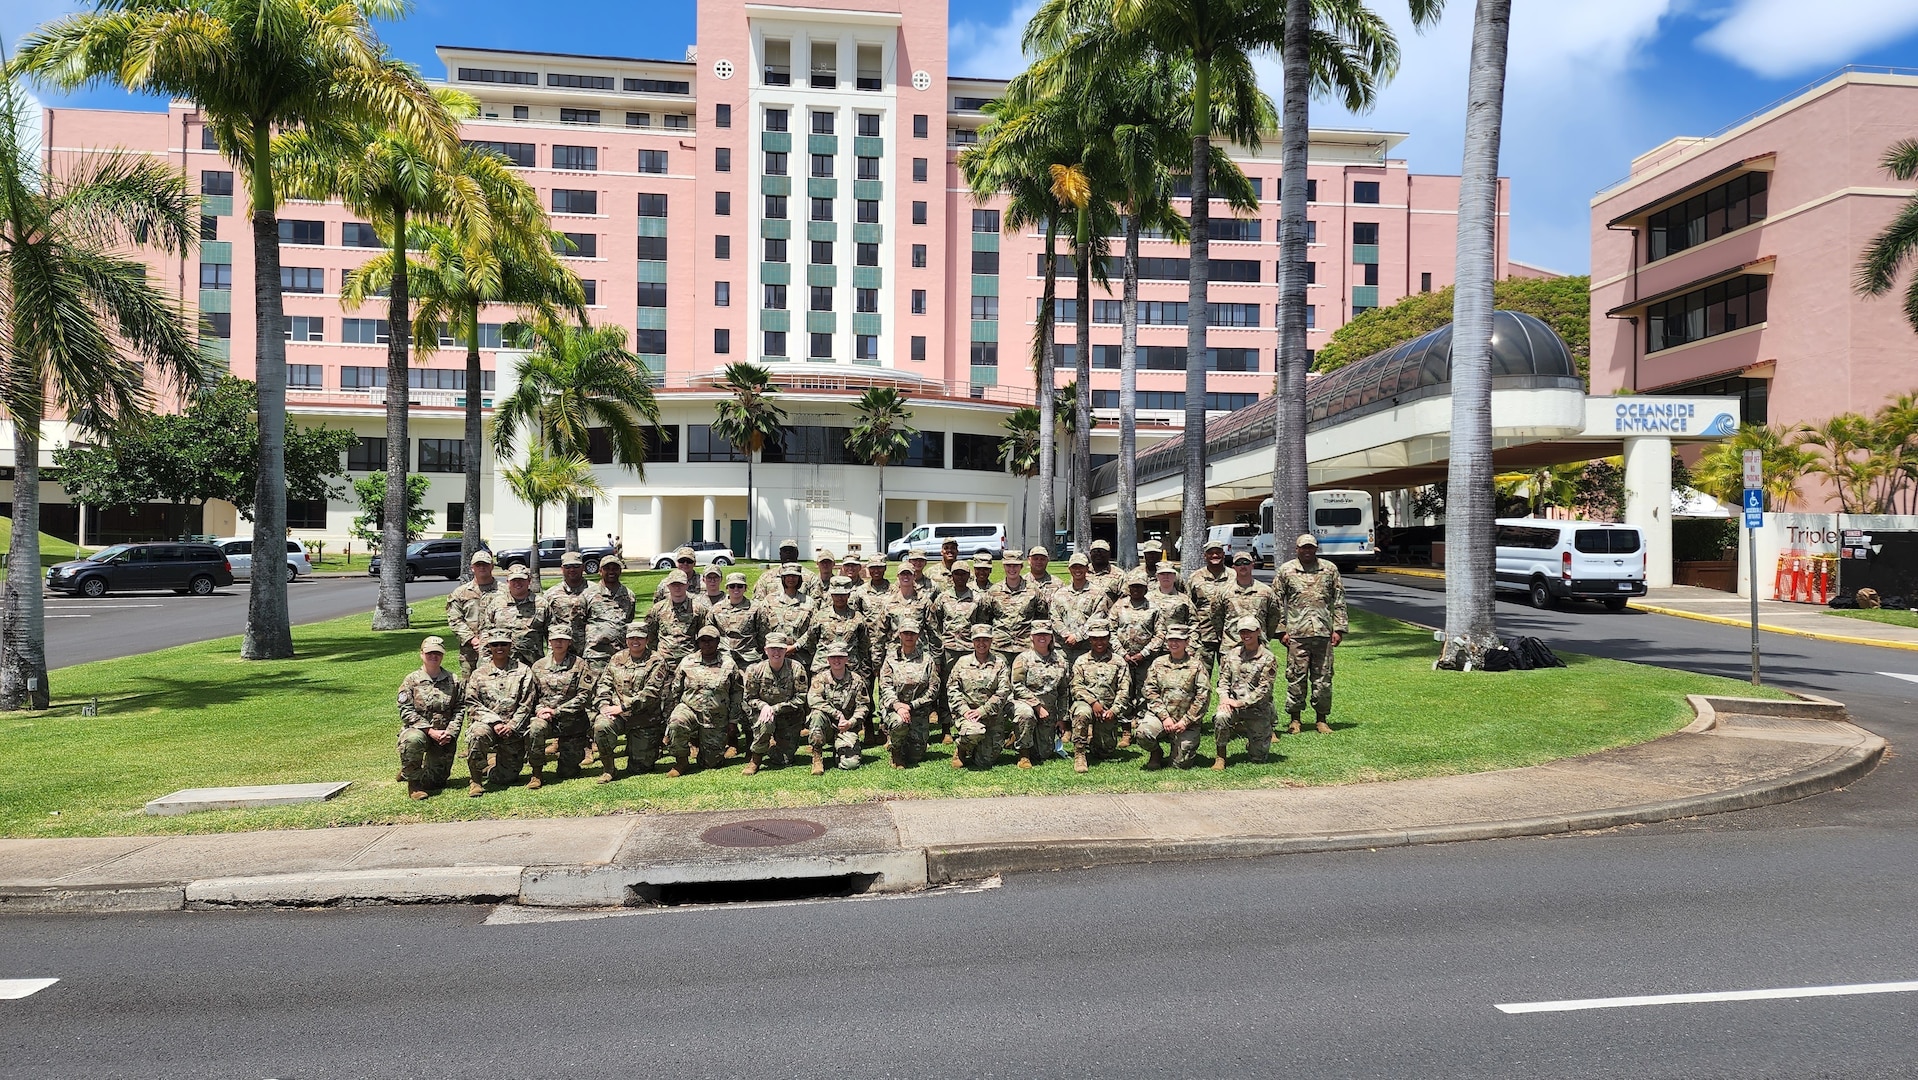 U.S. Air Force Airmen assigned to the 125th Medical Group, Florida Air National Guard, in front of Tripler Army Medical Center, Army Post Schofield Barracks, in Honolulu July 13, 2022. The multidisciplinary team of physicians, nurses, nurse practitioners, dentists and bioenvironmental technicians satisfied much-needed inpatient clinical hours and medical training in a hospital environment.